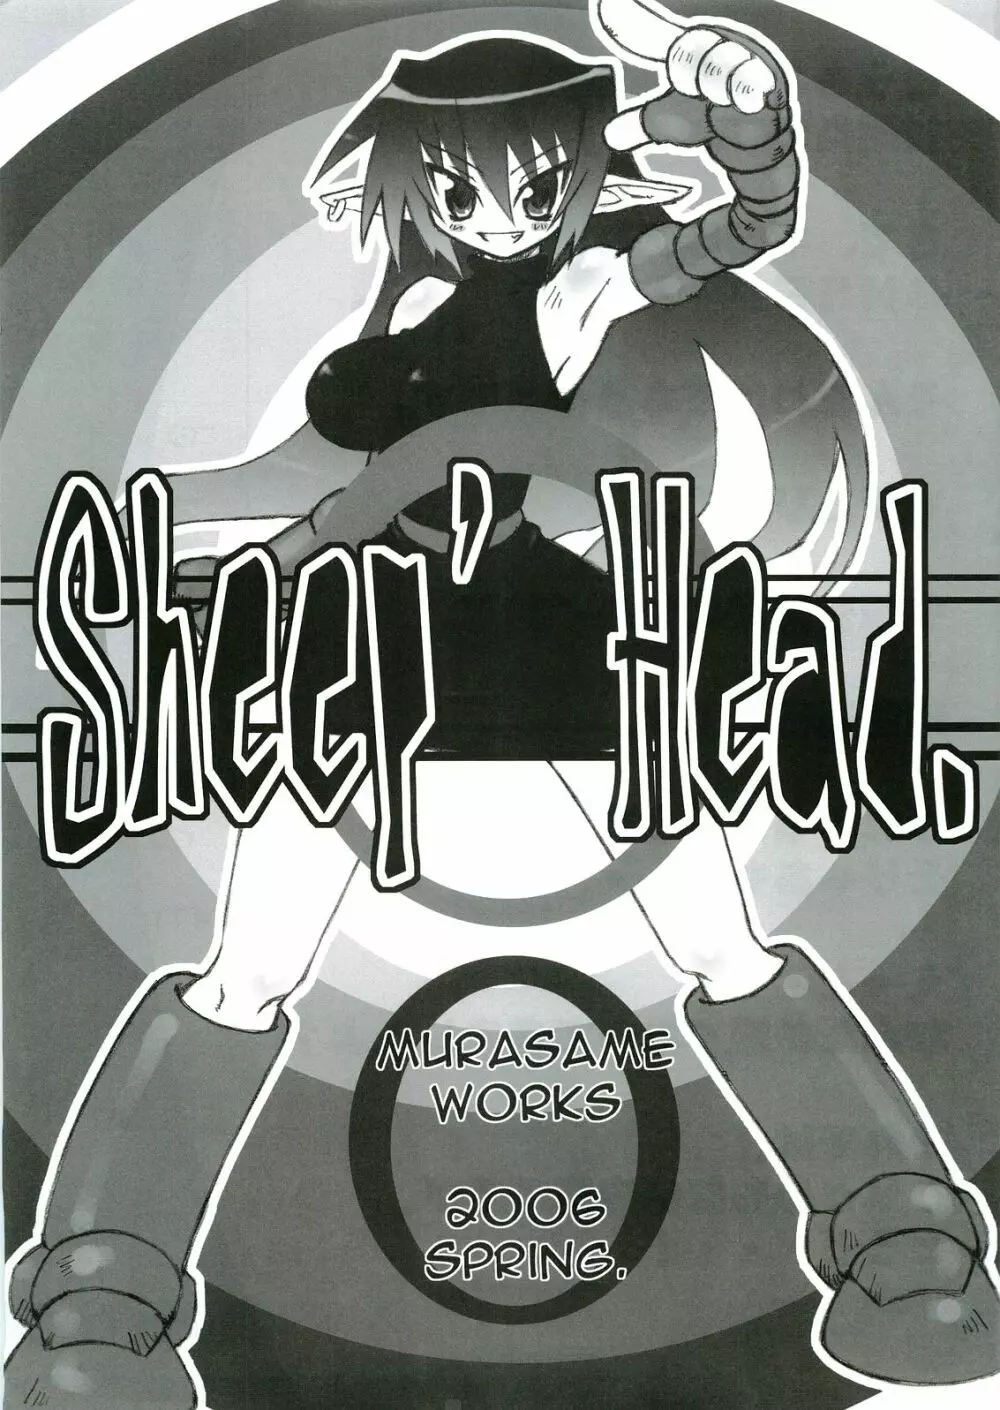 Sheep' Head. | murasame works 2006 spring Page.1